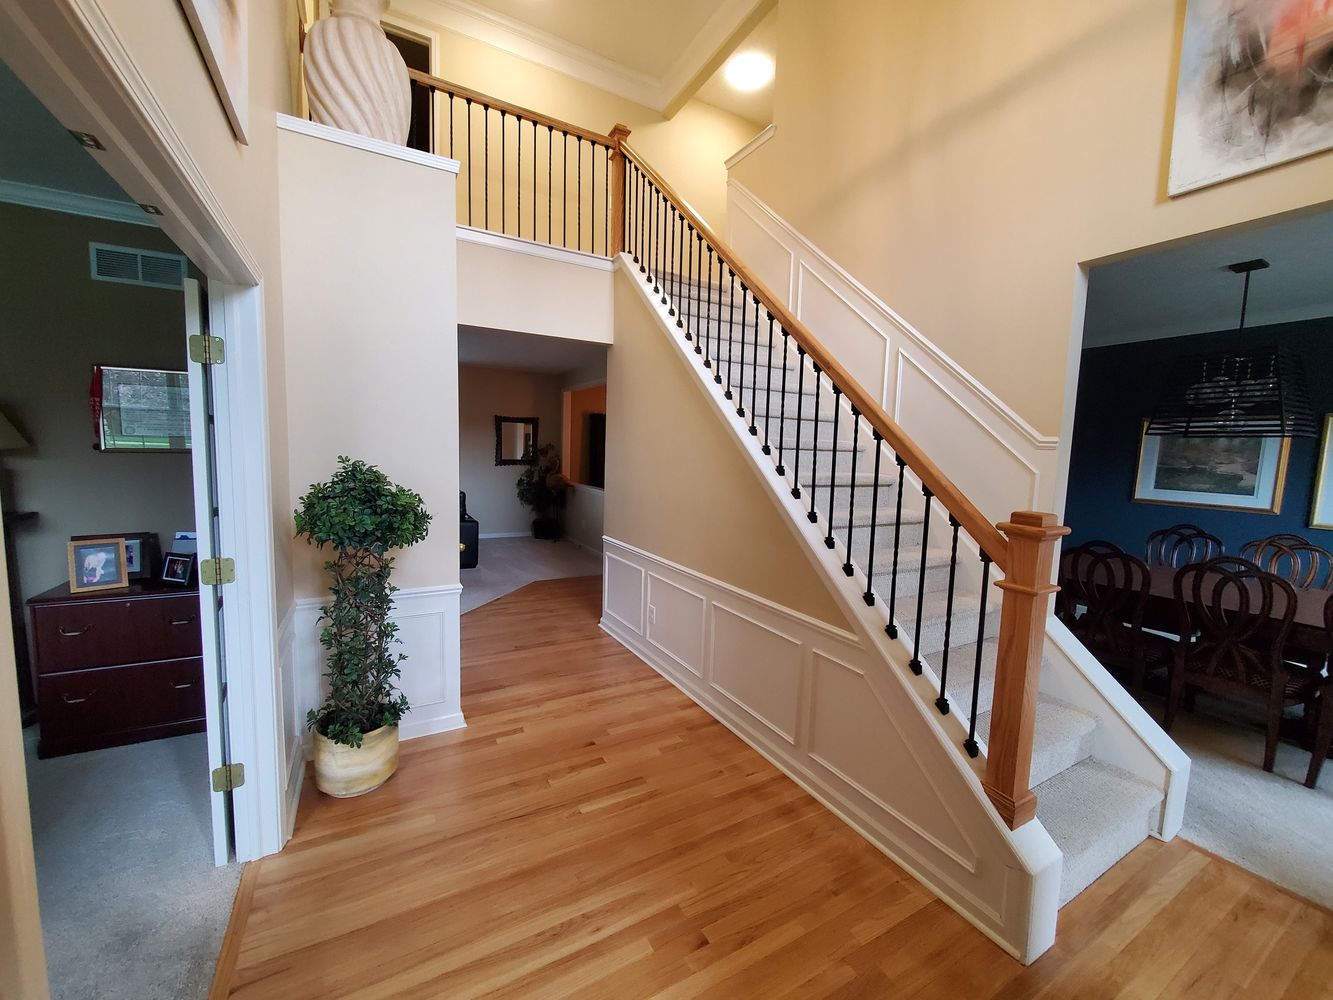 beautiful remodel of home with new hardwood floor, carpet, and stair railing.